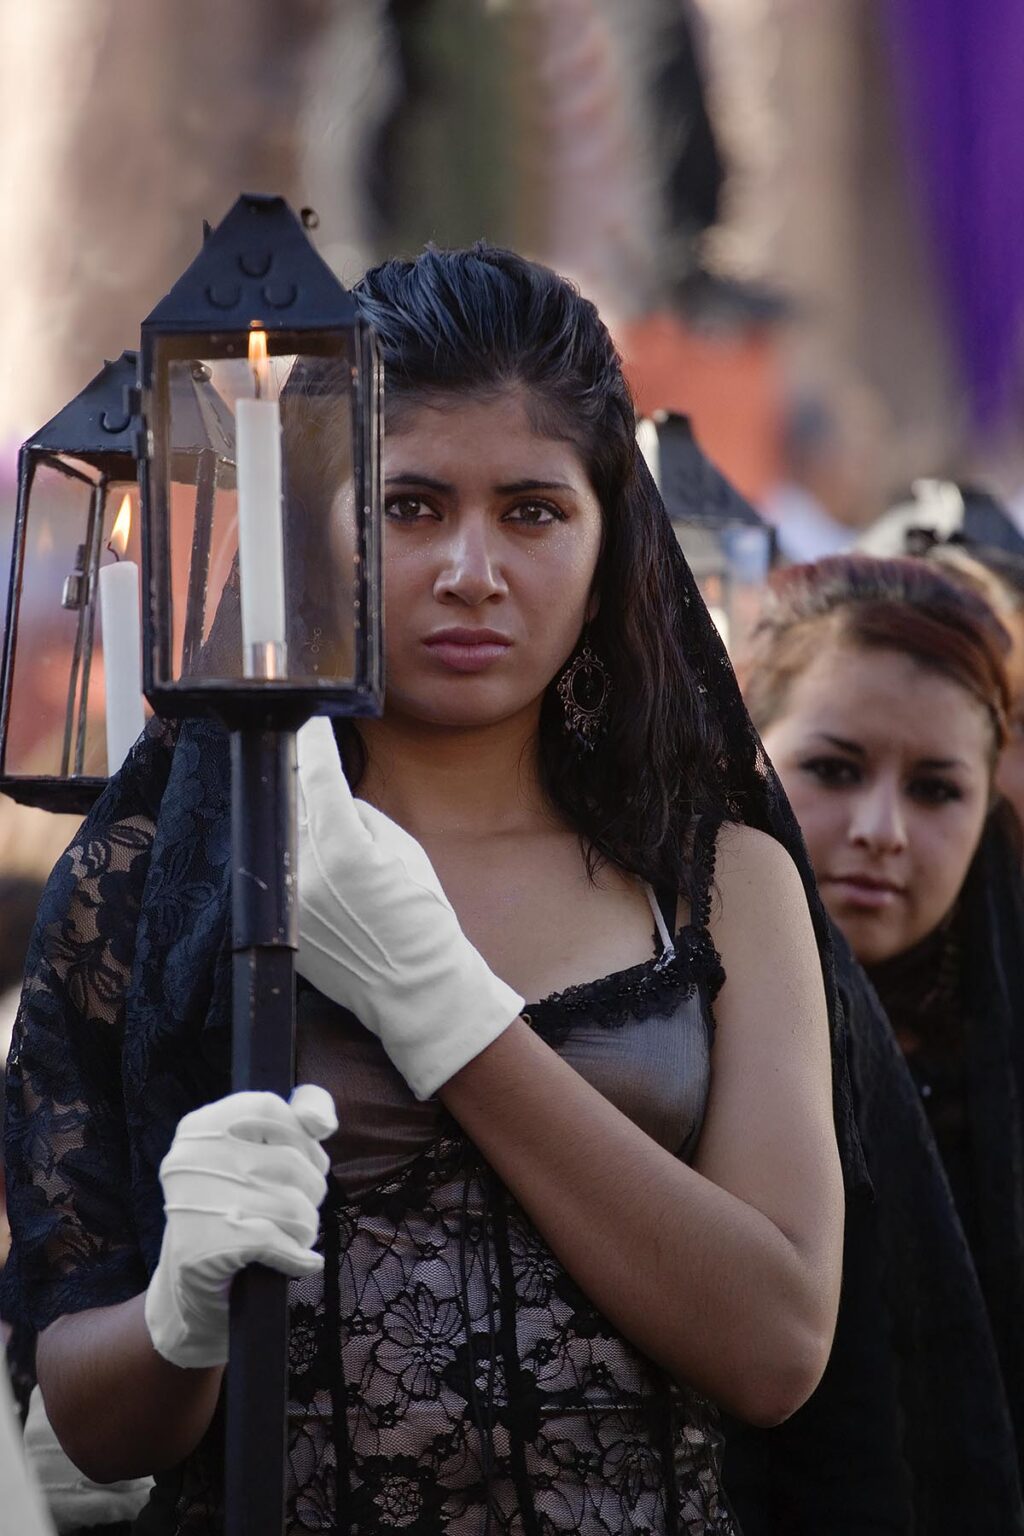 MEXICAN WOMAN in MANTILLA with lantern during the EASTER PROCESSION - SAN MIGUEL DE ALLENDE, MEXICO